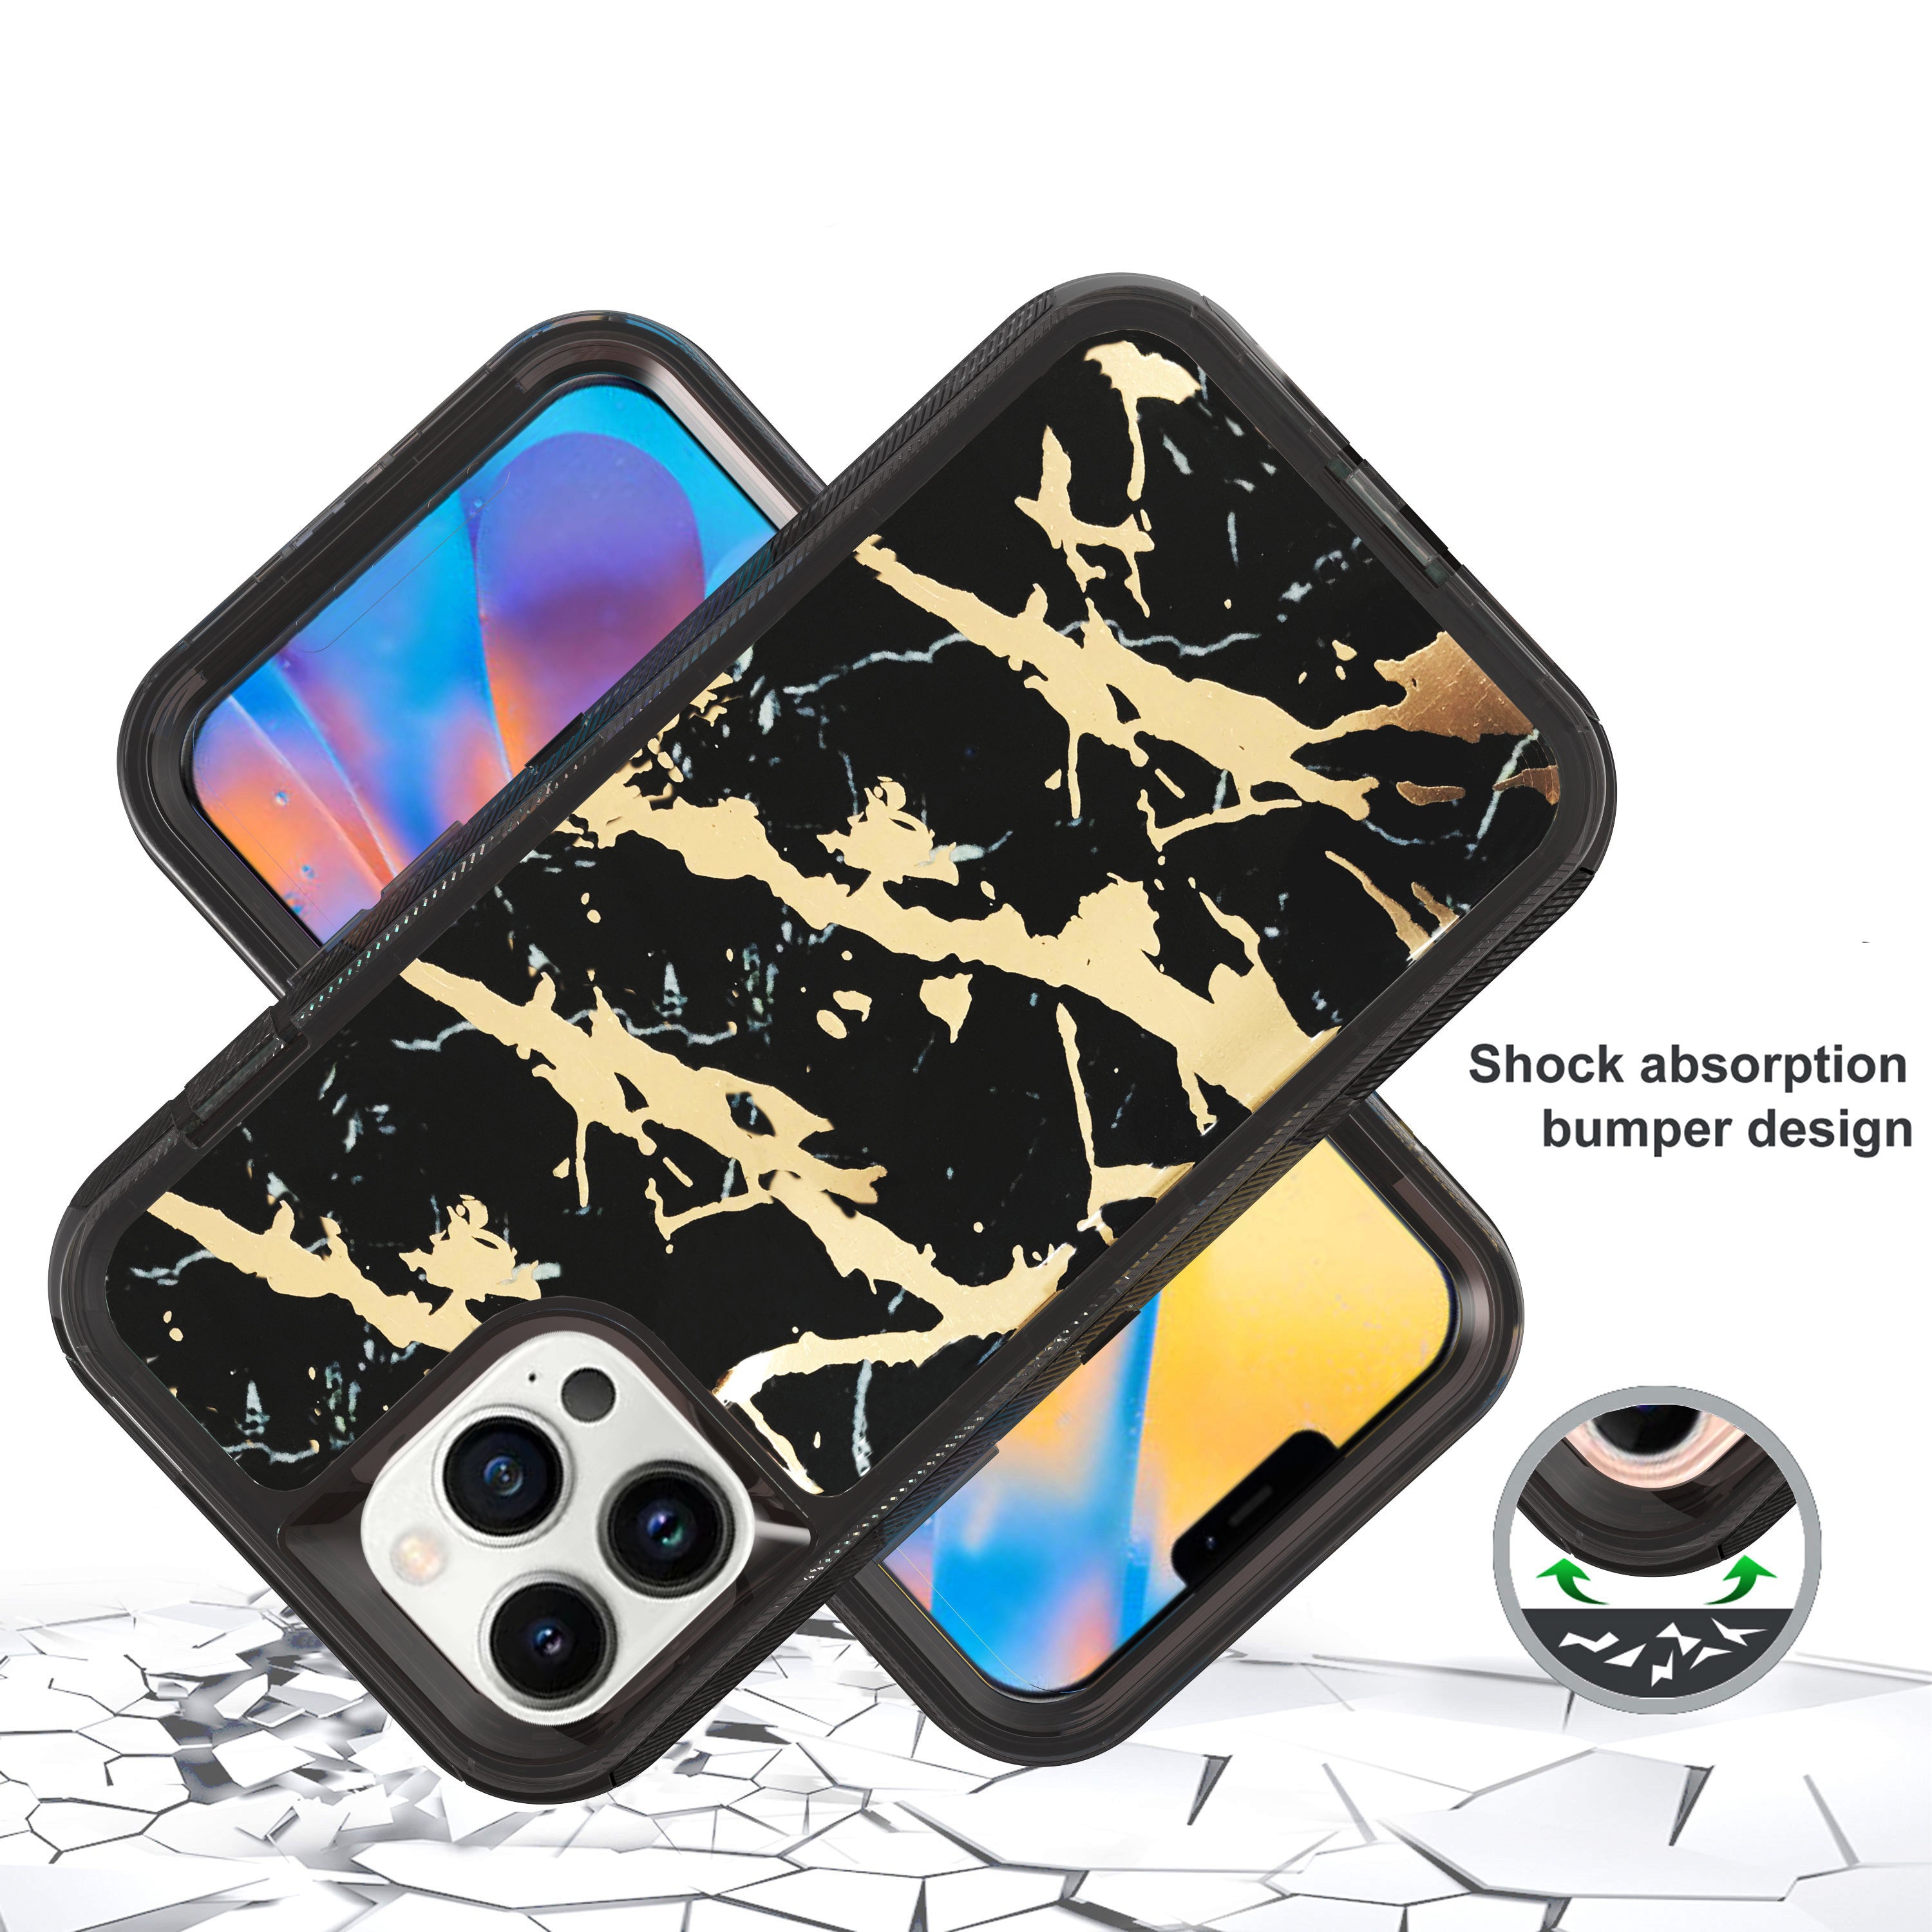 iPhone 11 Pro (5.8") Anti-Shock Durable Protective TPU Heavy Duty Marble Clear Case